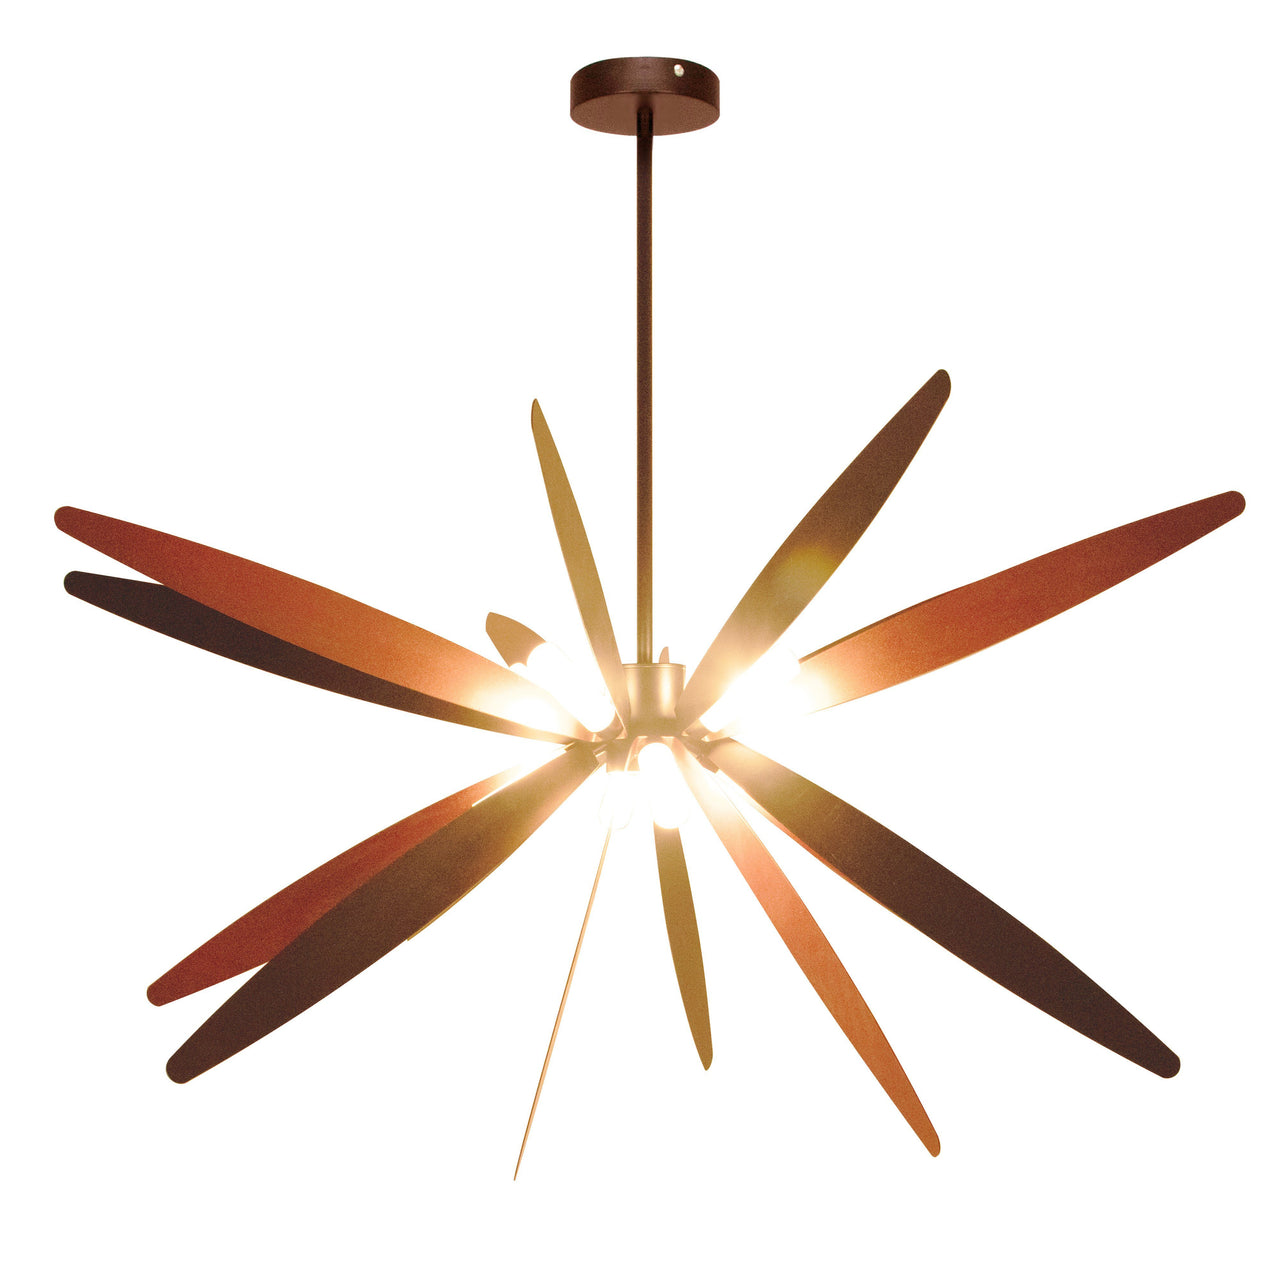 Lyell Dragonfly Sputnik Light Fixture, 4 Bulb Design, Overhead Ceiling Lighting for Foyer, Entryway, or Living Room, Classic Sand, Rose Gold, and Matte Black Finish Pendant Lighting Canyon Home 